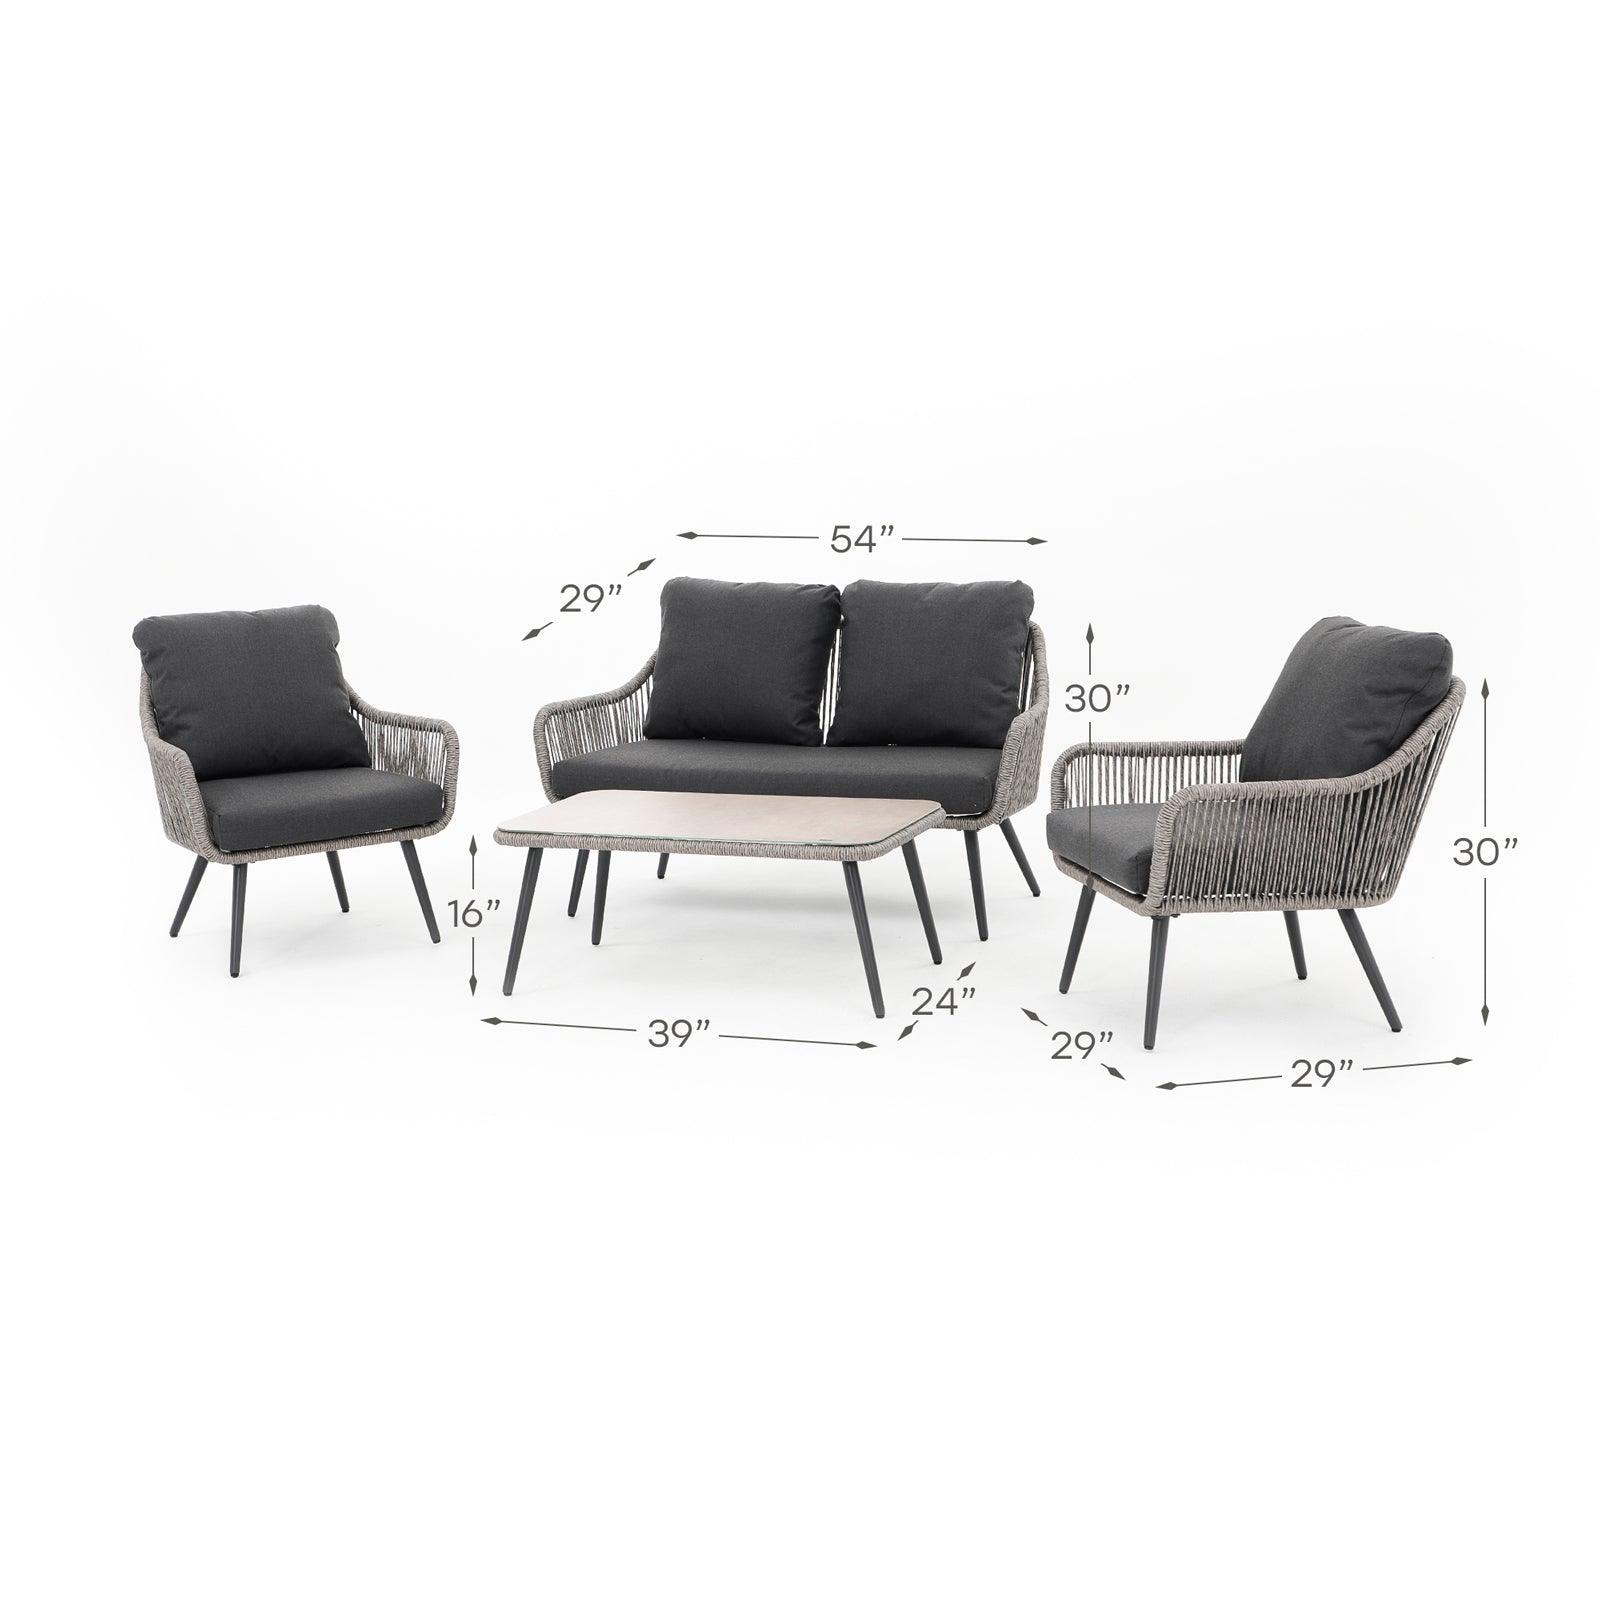 Hallerbos 4-Piece outdoor sofa set with dark grey cushions, steel frame and grey twisted rattan design, 2 armchairs, 1 loveseat, 1 rectangle coffee table, dimension information - Jardina Furniture #Color_Grey